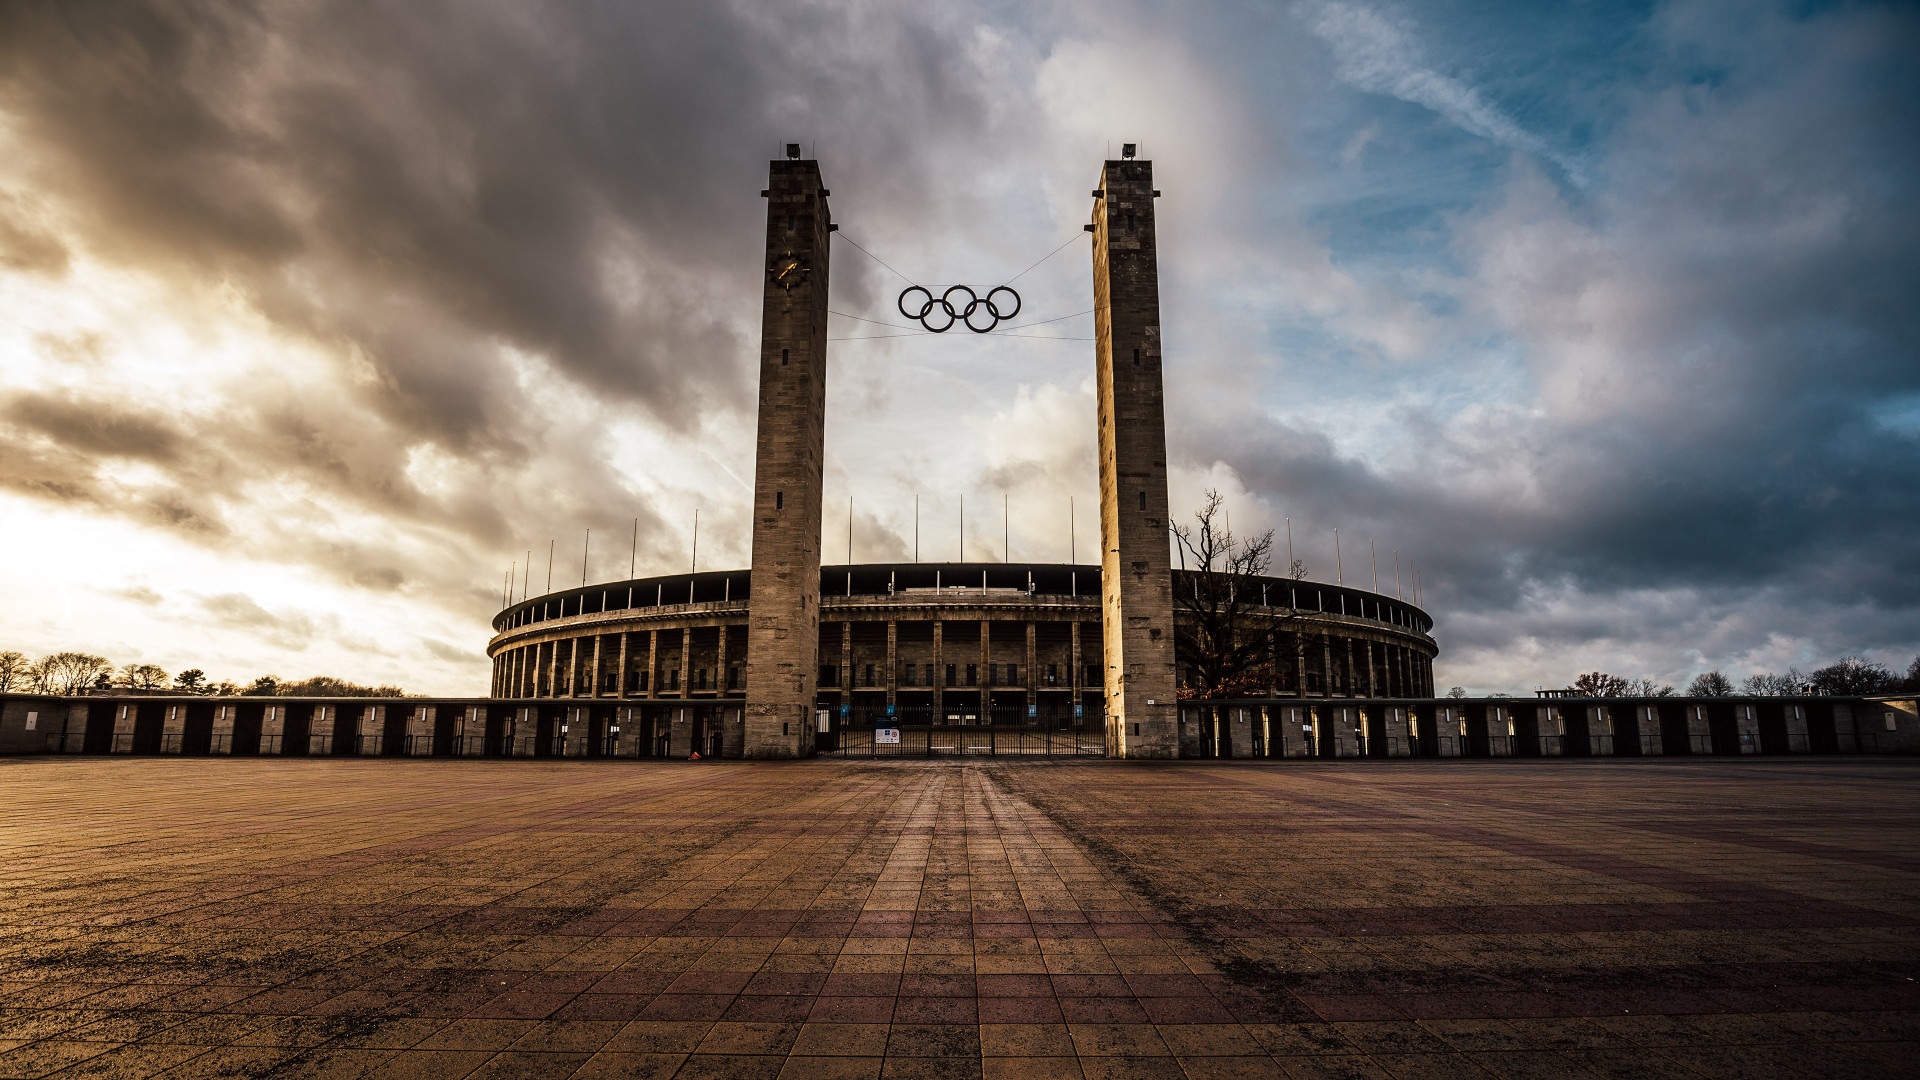 The Olympiastadion from Berlin wallpaper 1920x1080